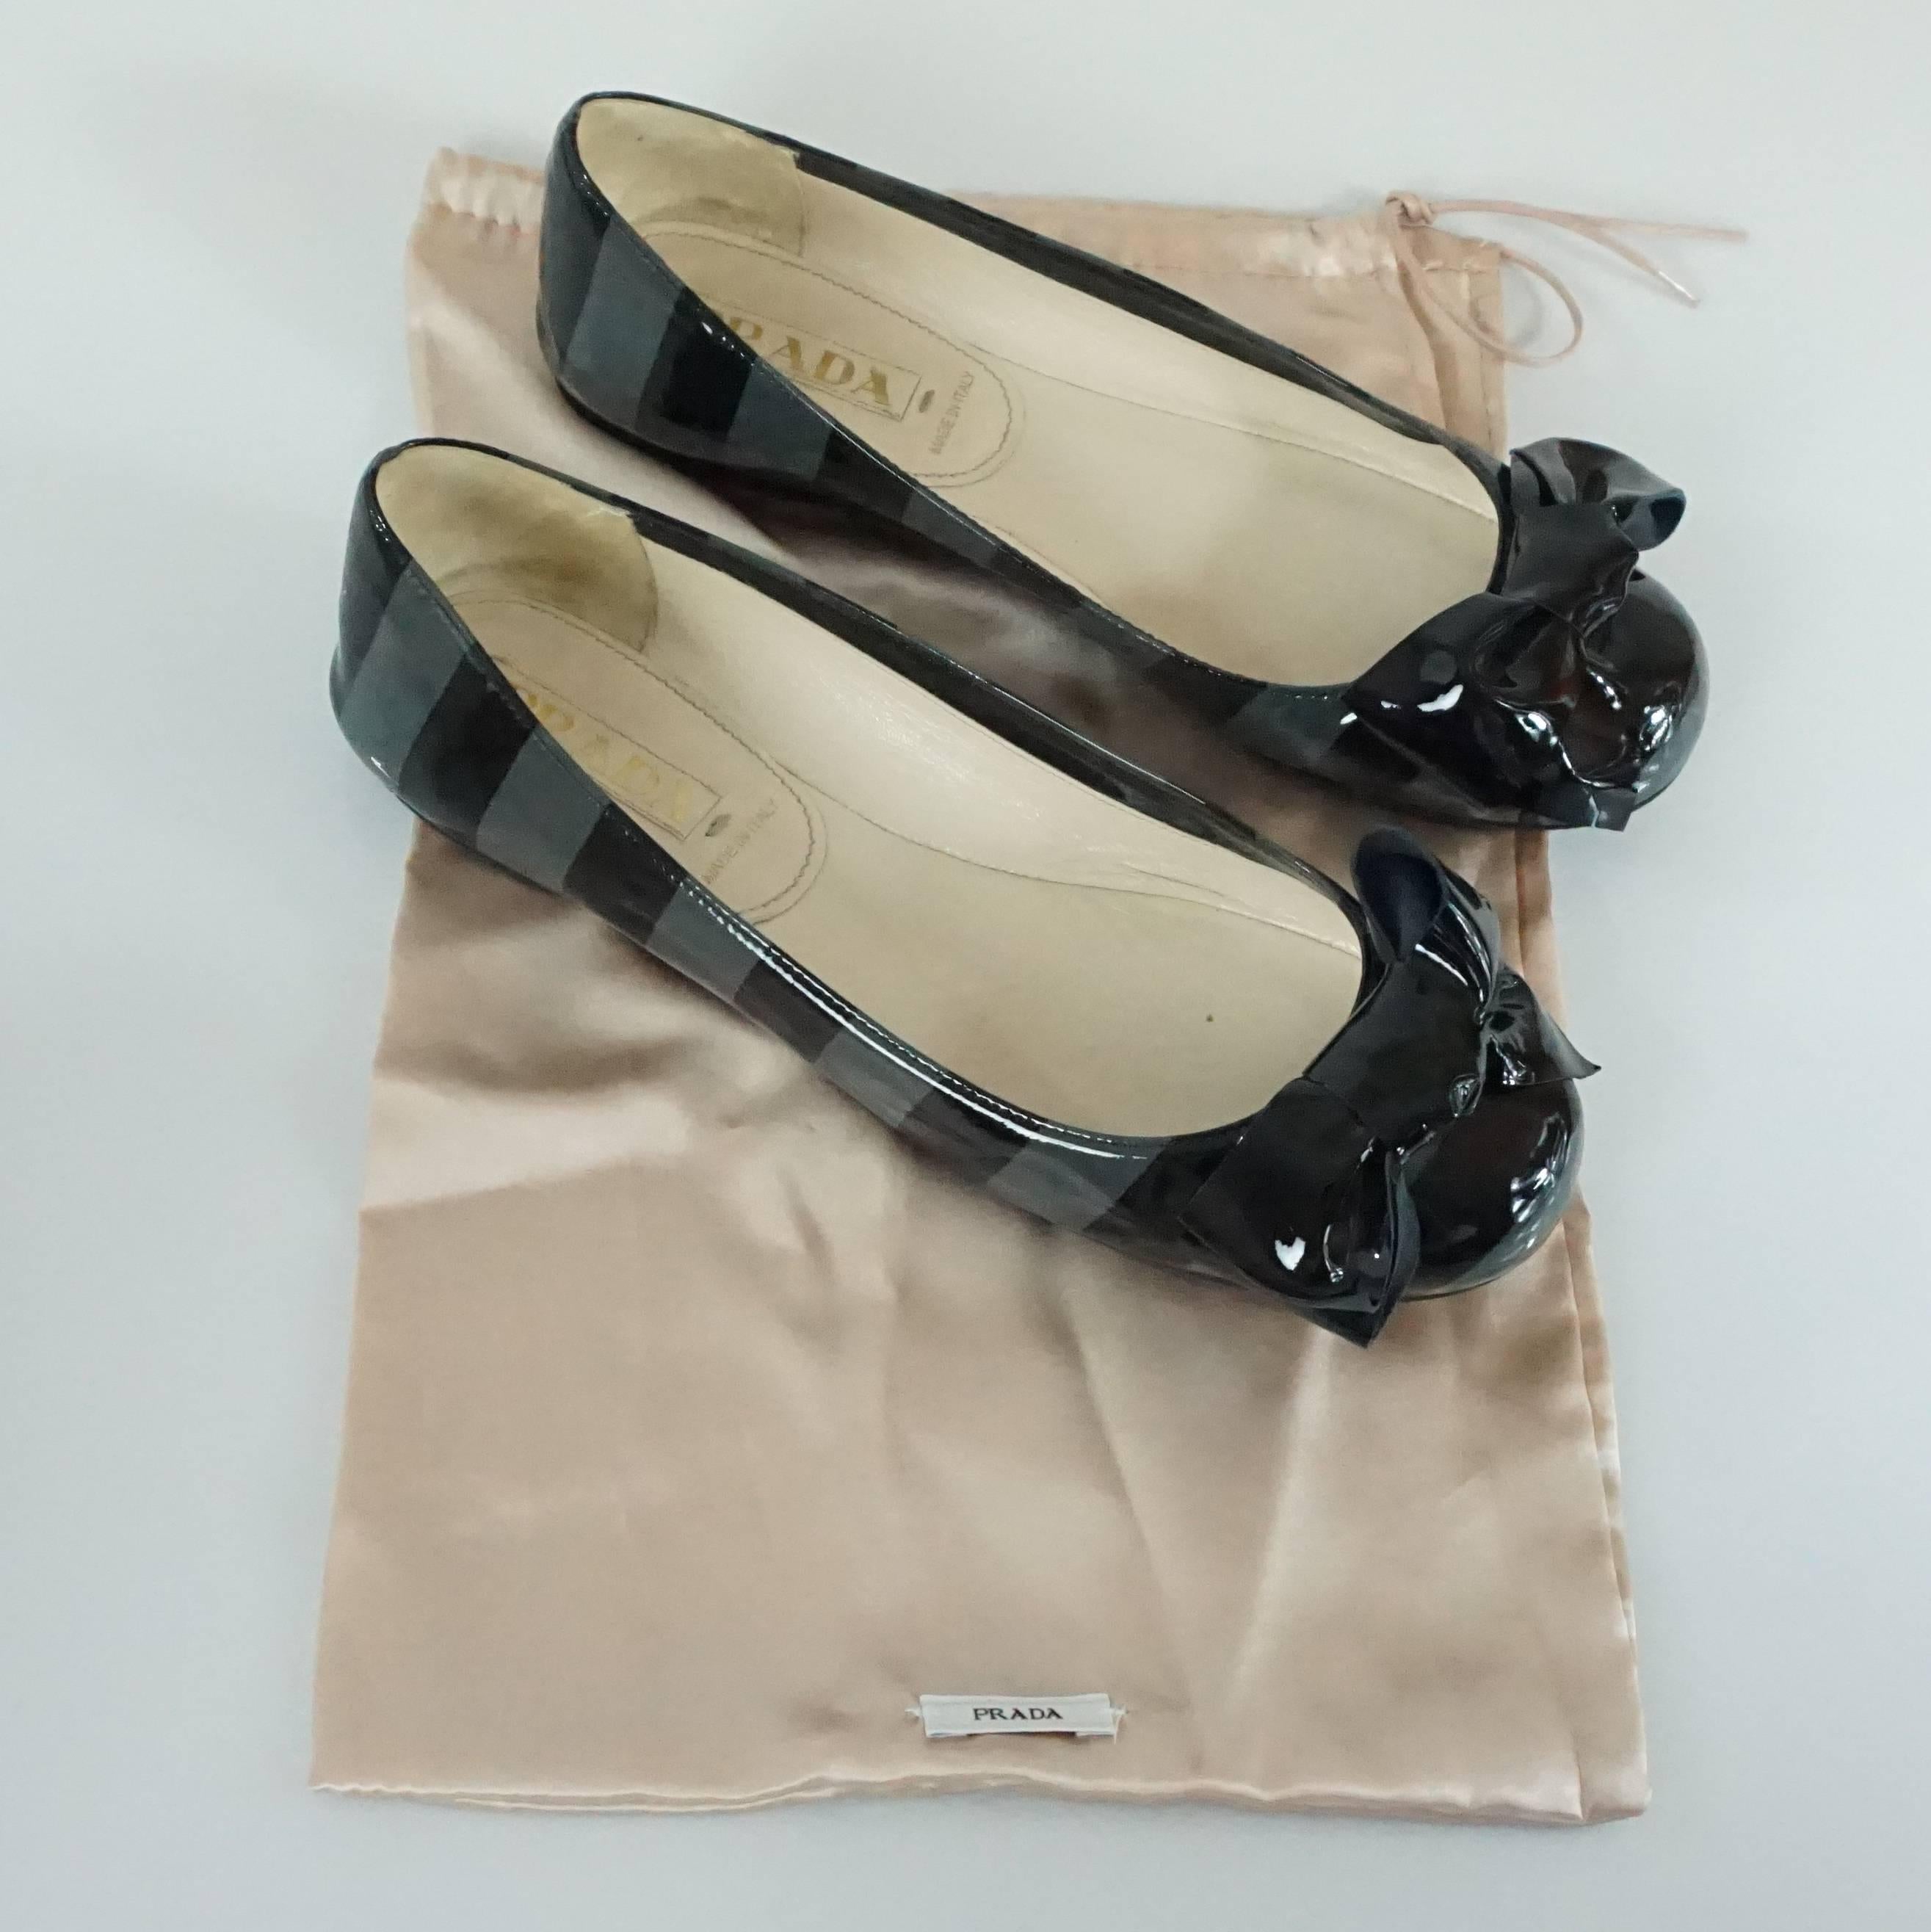 Prada Black and Gray Patent Striped Flats with Bow - 36 3